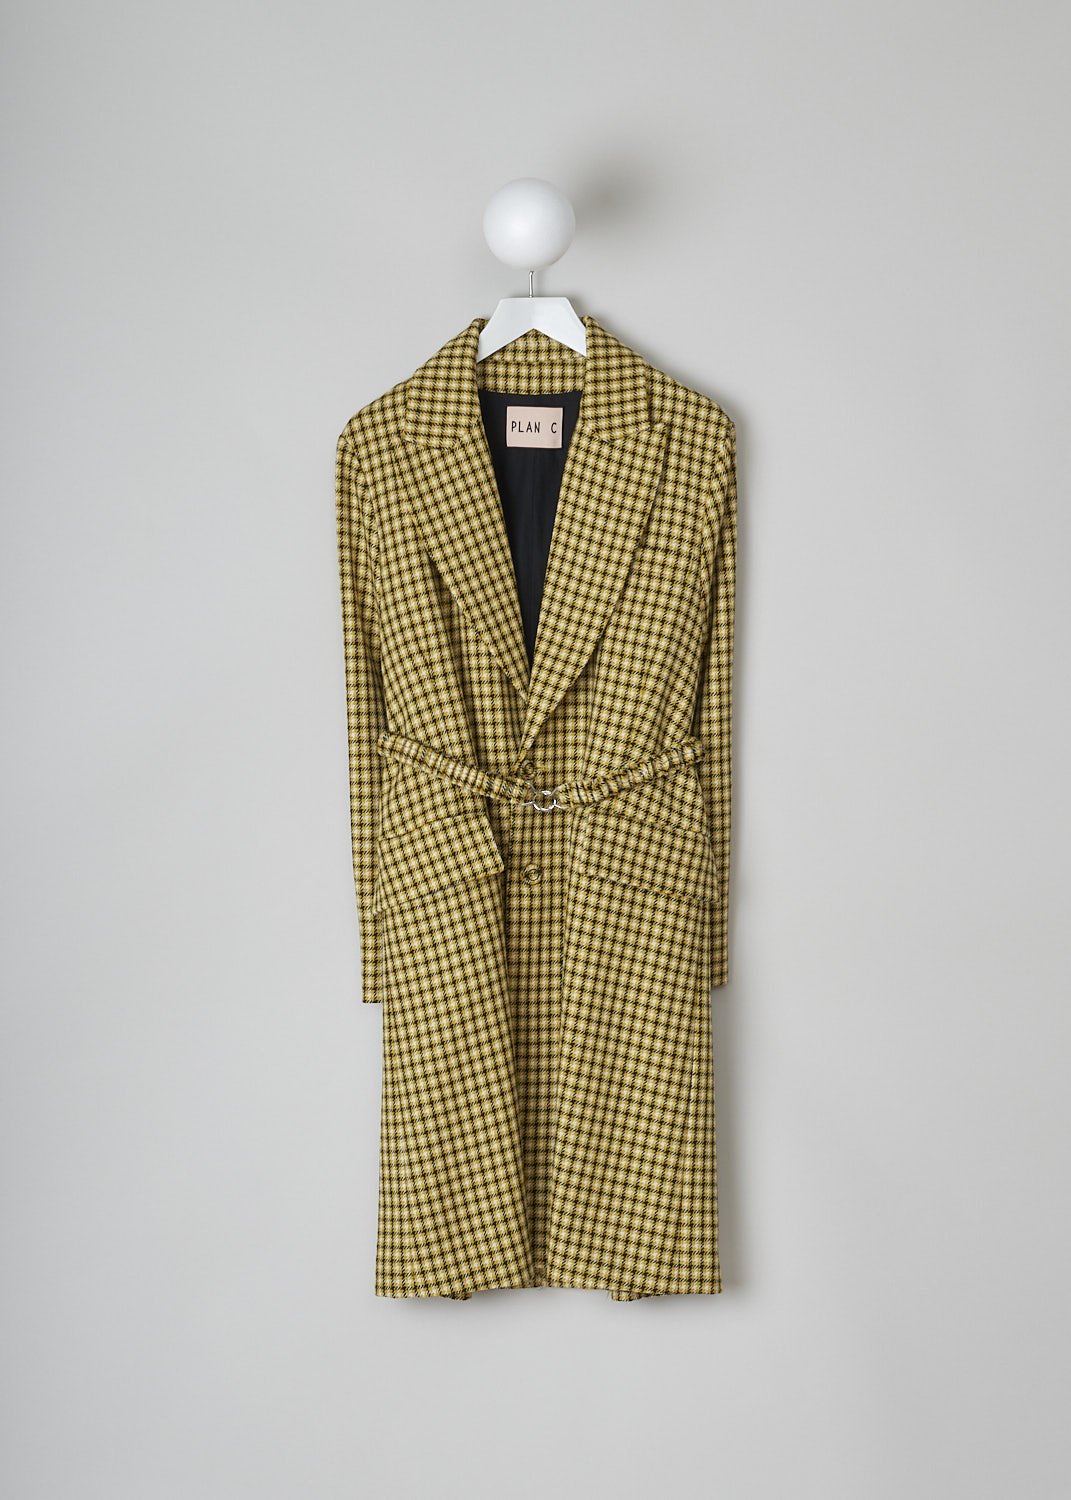 PLAN C, YELLOW CHECK COAT, CSCAC57FY0_TW035_QUY02, Yellow, Print, Front, This single-breasted yellow checked coat has a peaked lapel with a deeper V-neckline and a front button closure. The long sleeves have buttoned cuff. The coat has a single breast pocket, two flap pockets and a single inner pocket. The detachable elasticated belt in the same checked pattern can be used to cinch in the waist. In the back, a centre vent can be found. The coat has a straight hemline. 
